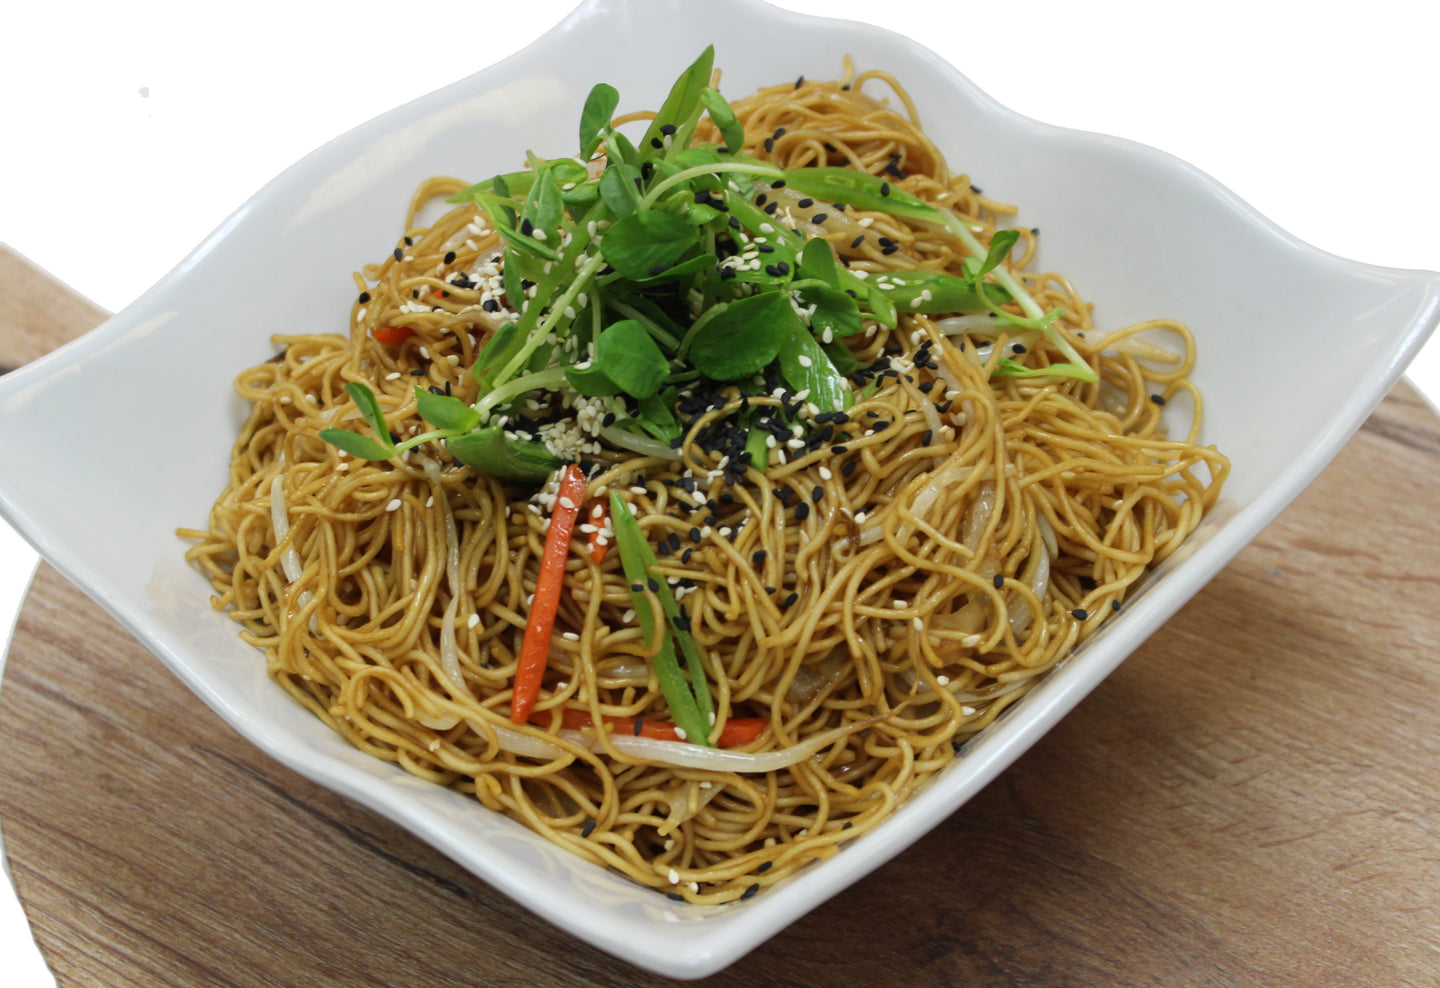 Lo Mein Noodles made by Ely's Fine Foods